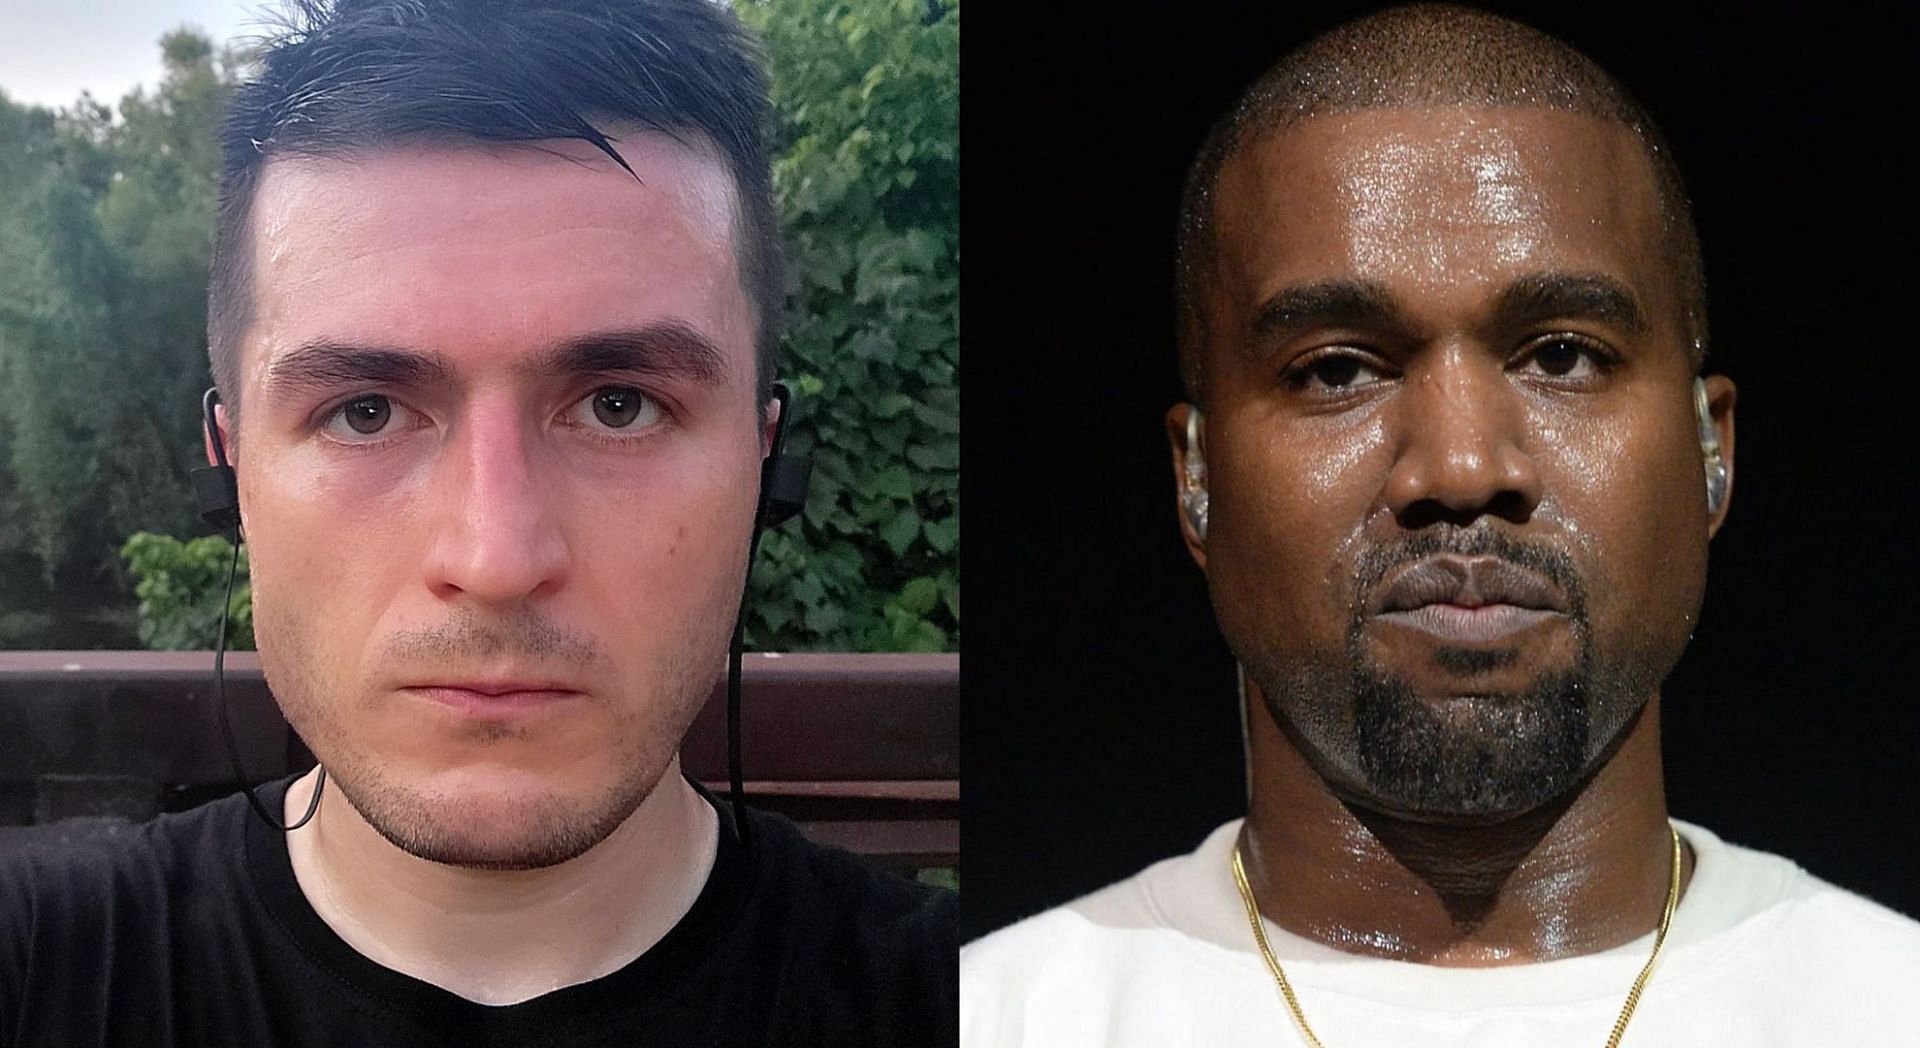 Top 50 Podcasts in America This Week: Lex Fridman and Kanye West Face-off